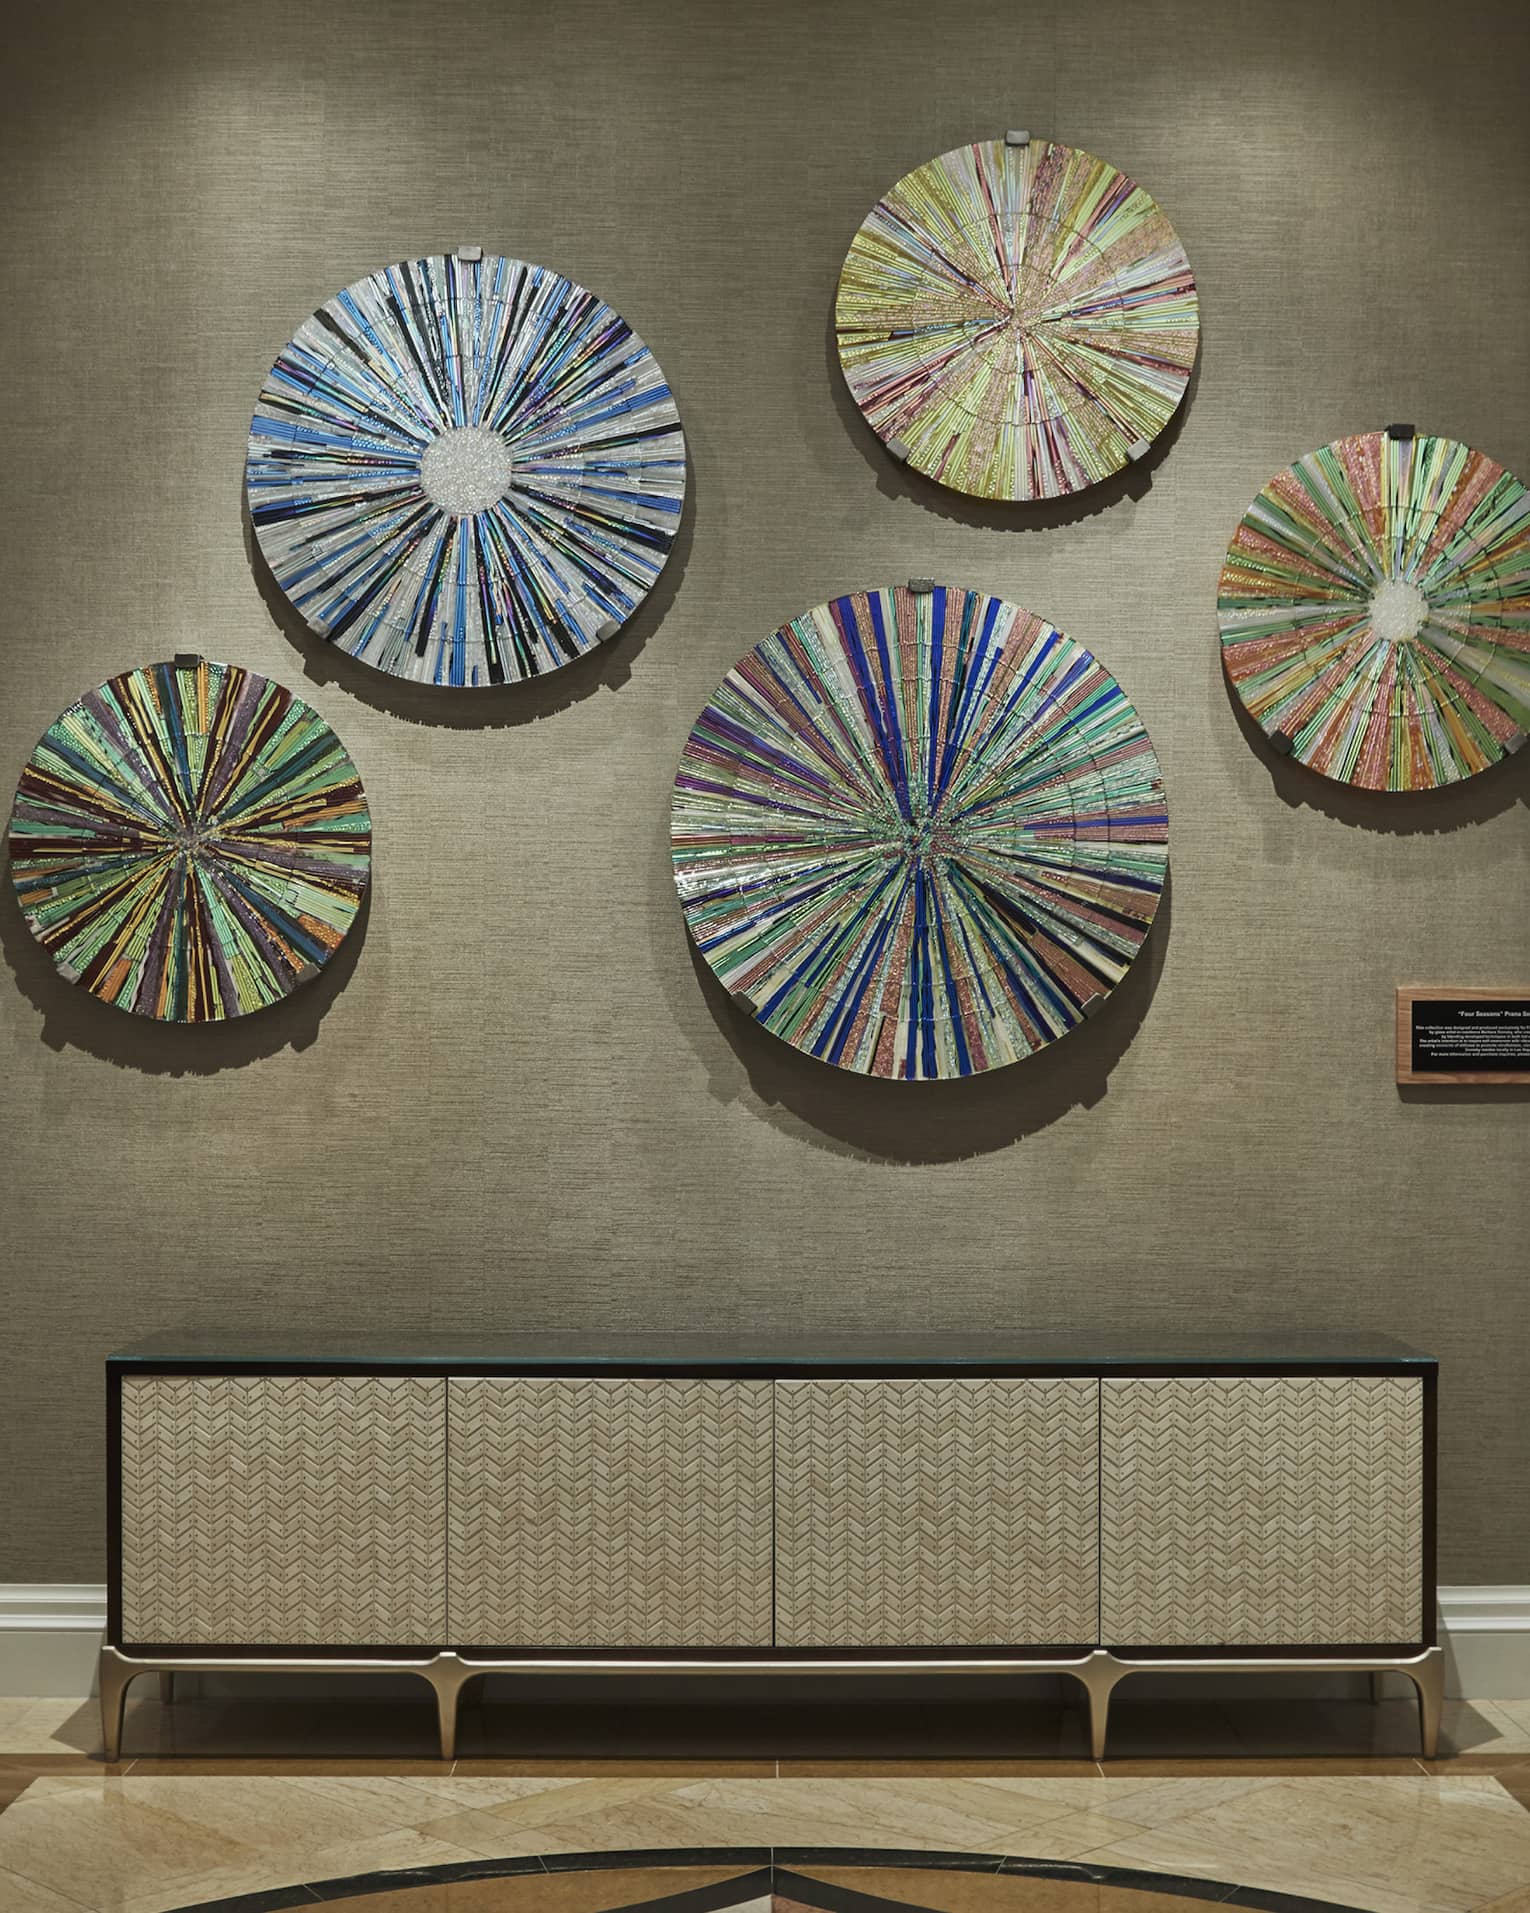 Spa wall with colourful disc art mounted on wall over console table